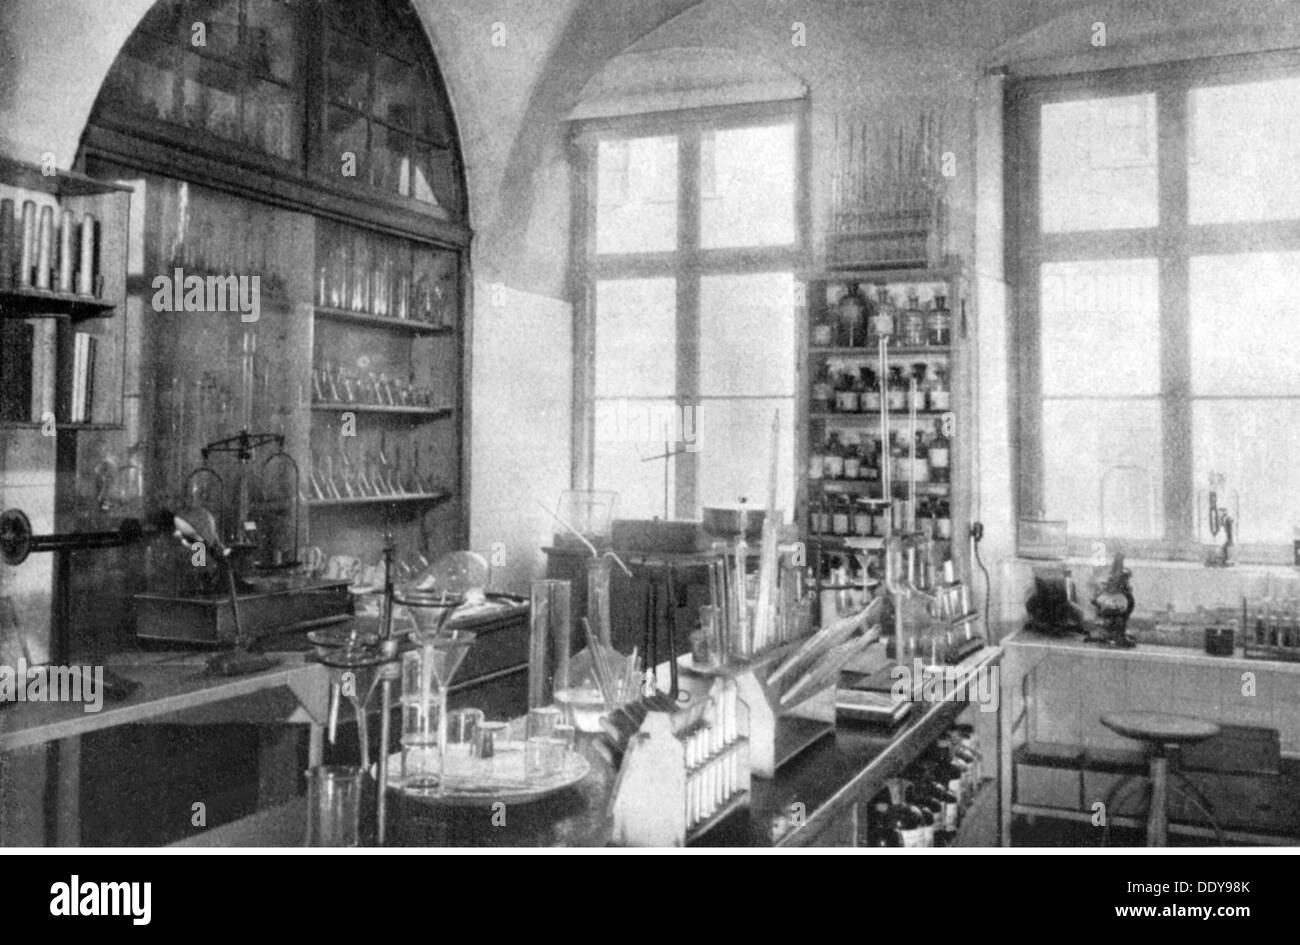 medicine,pharmacy,pharmacy,Mohren-Apotheke,Bayreuth,built after plans by Michael Mebart(circa 1573 - 1621),1610,interior view,vaults of the laboratory,circa 1900,17th century,geography / travel,Germany,Bavaria,Franconia,Mohren - Apotheke,Mohrenapotheke,architecture,pharmaceutics,pharmacology,medicinal drug,medicament,drugs,medication,pill,tablet,pills,tablets,pharmaceuticals,pharmaceutical products,at the turn of the 19th / 20th century,laboratory,lab,labs,laboratories,table,tables,vessel,vessels,experiment,experiments,,Additional-Rights-Clearences-Not Available Stock Photo